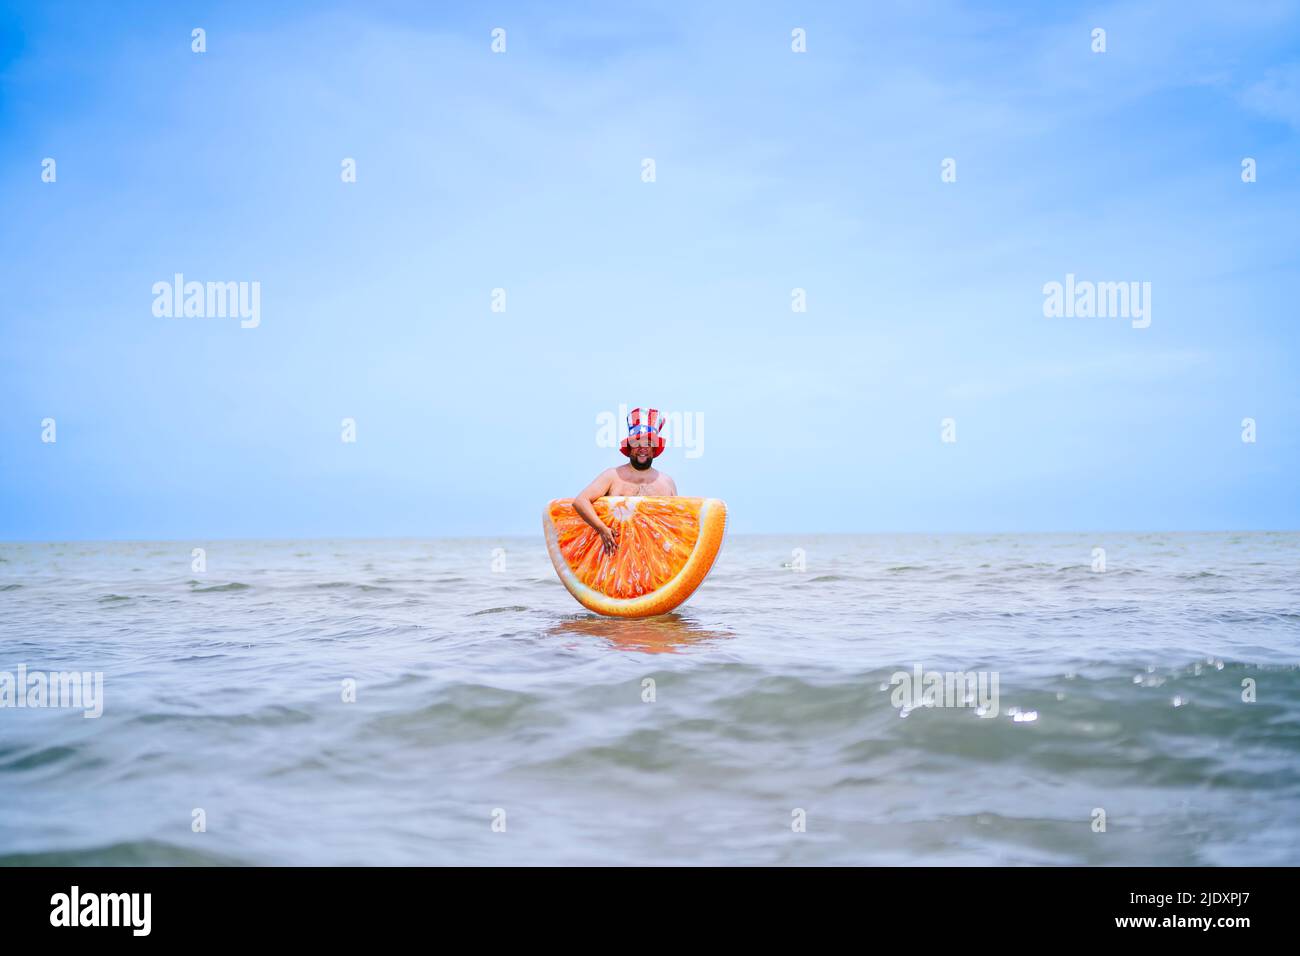 Man carrying inflatable orange slice standing in sea Stock Photo